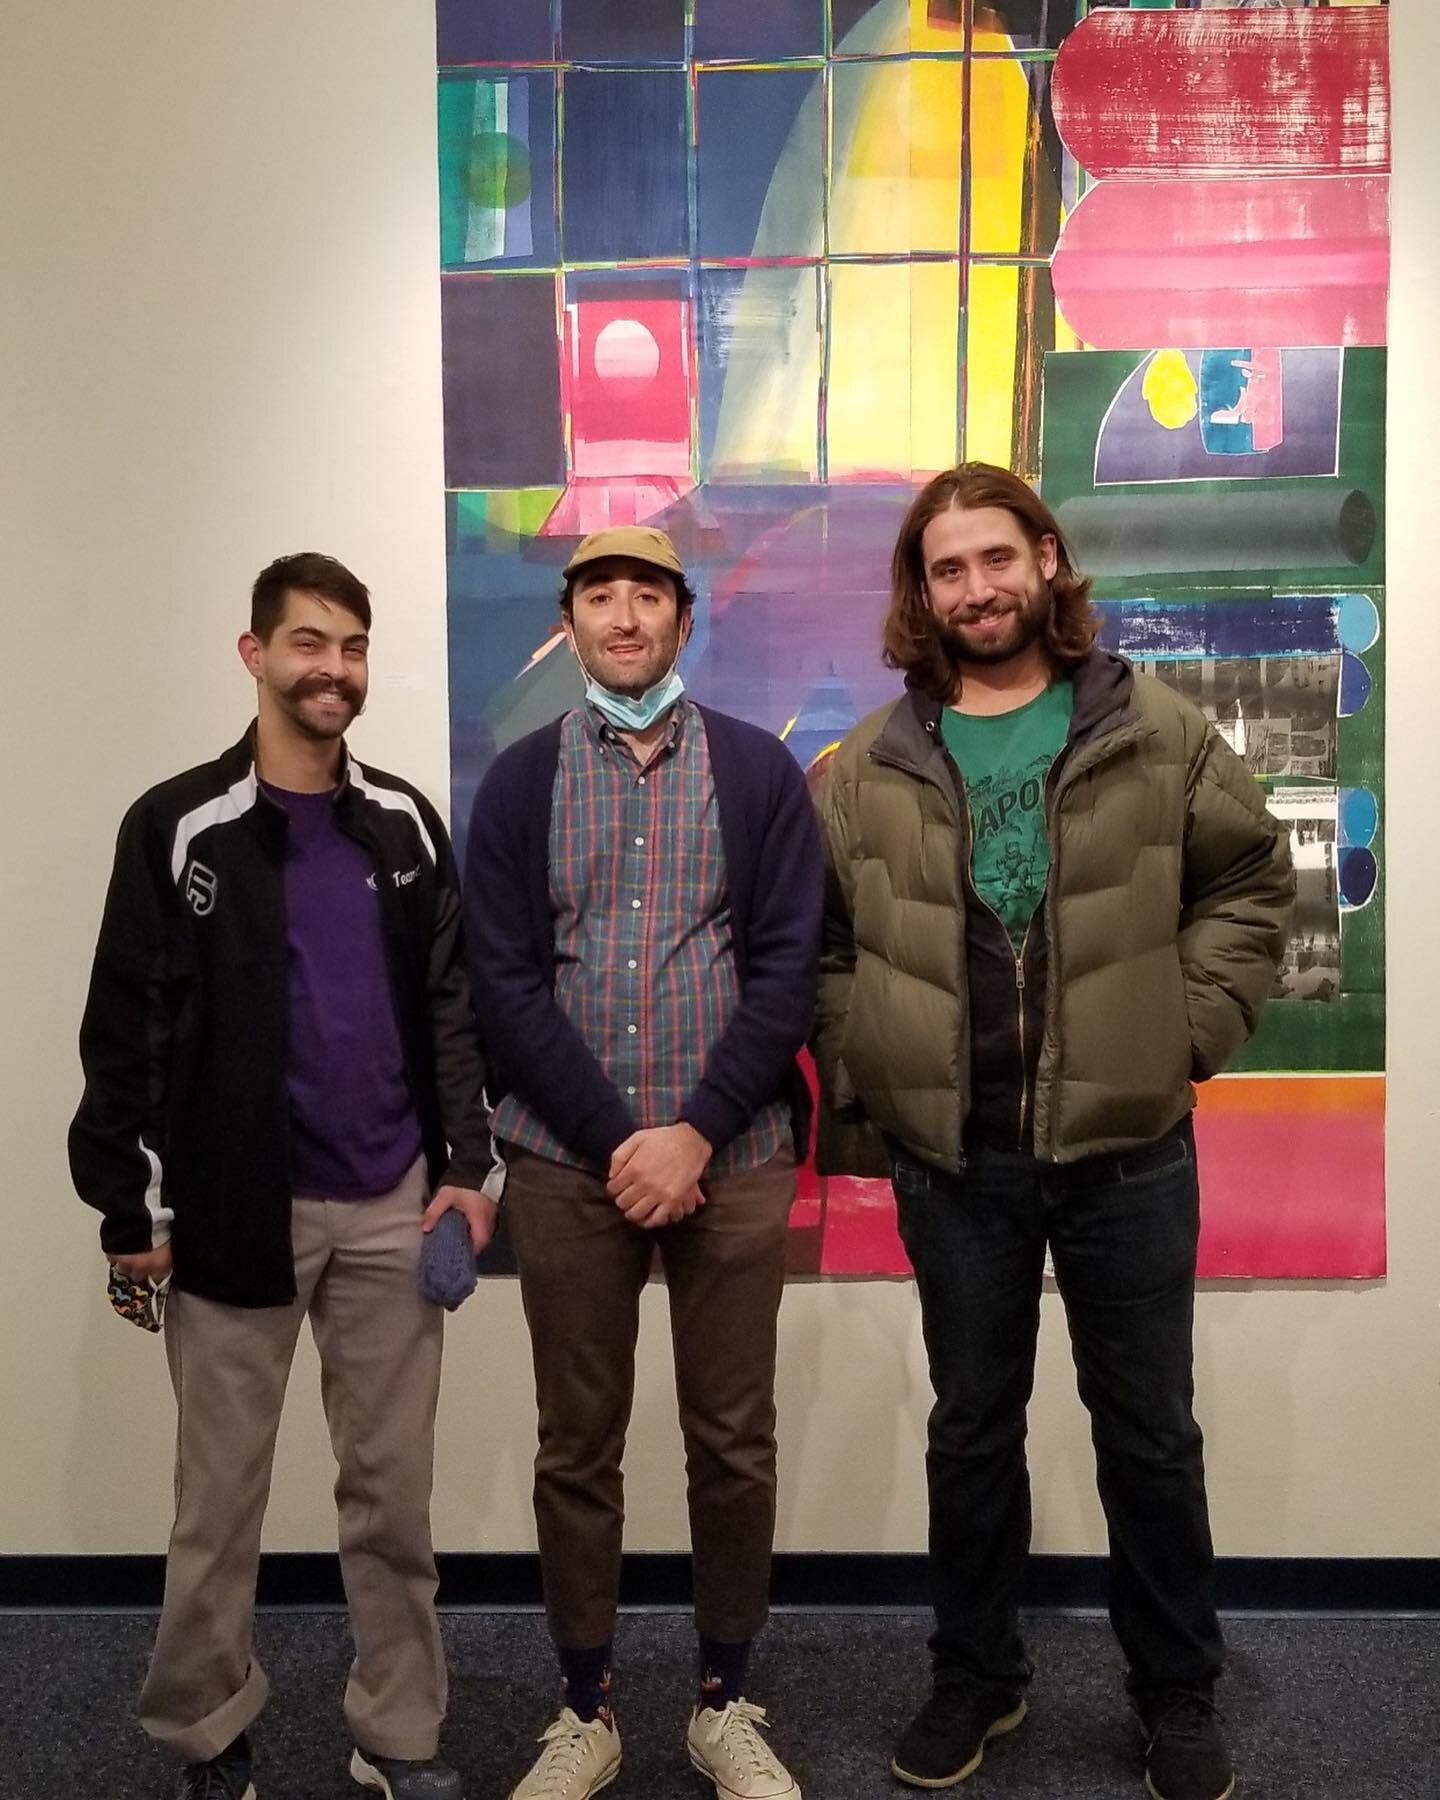 Pictured here are me, @mustachebraddon and Spencer when they came to my opening at Central Connecticut State University back in the fall. This was the last time I saw Spencer in person. Thanks Spencer for your support, incredible sense of humor, wisd